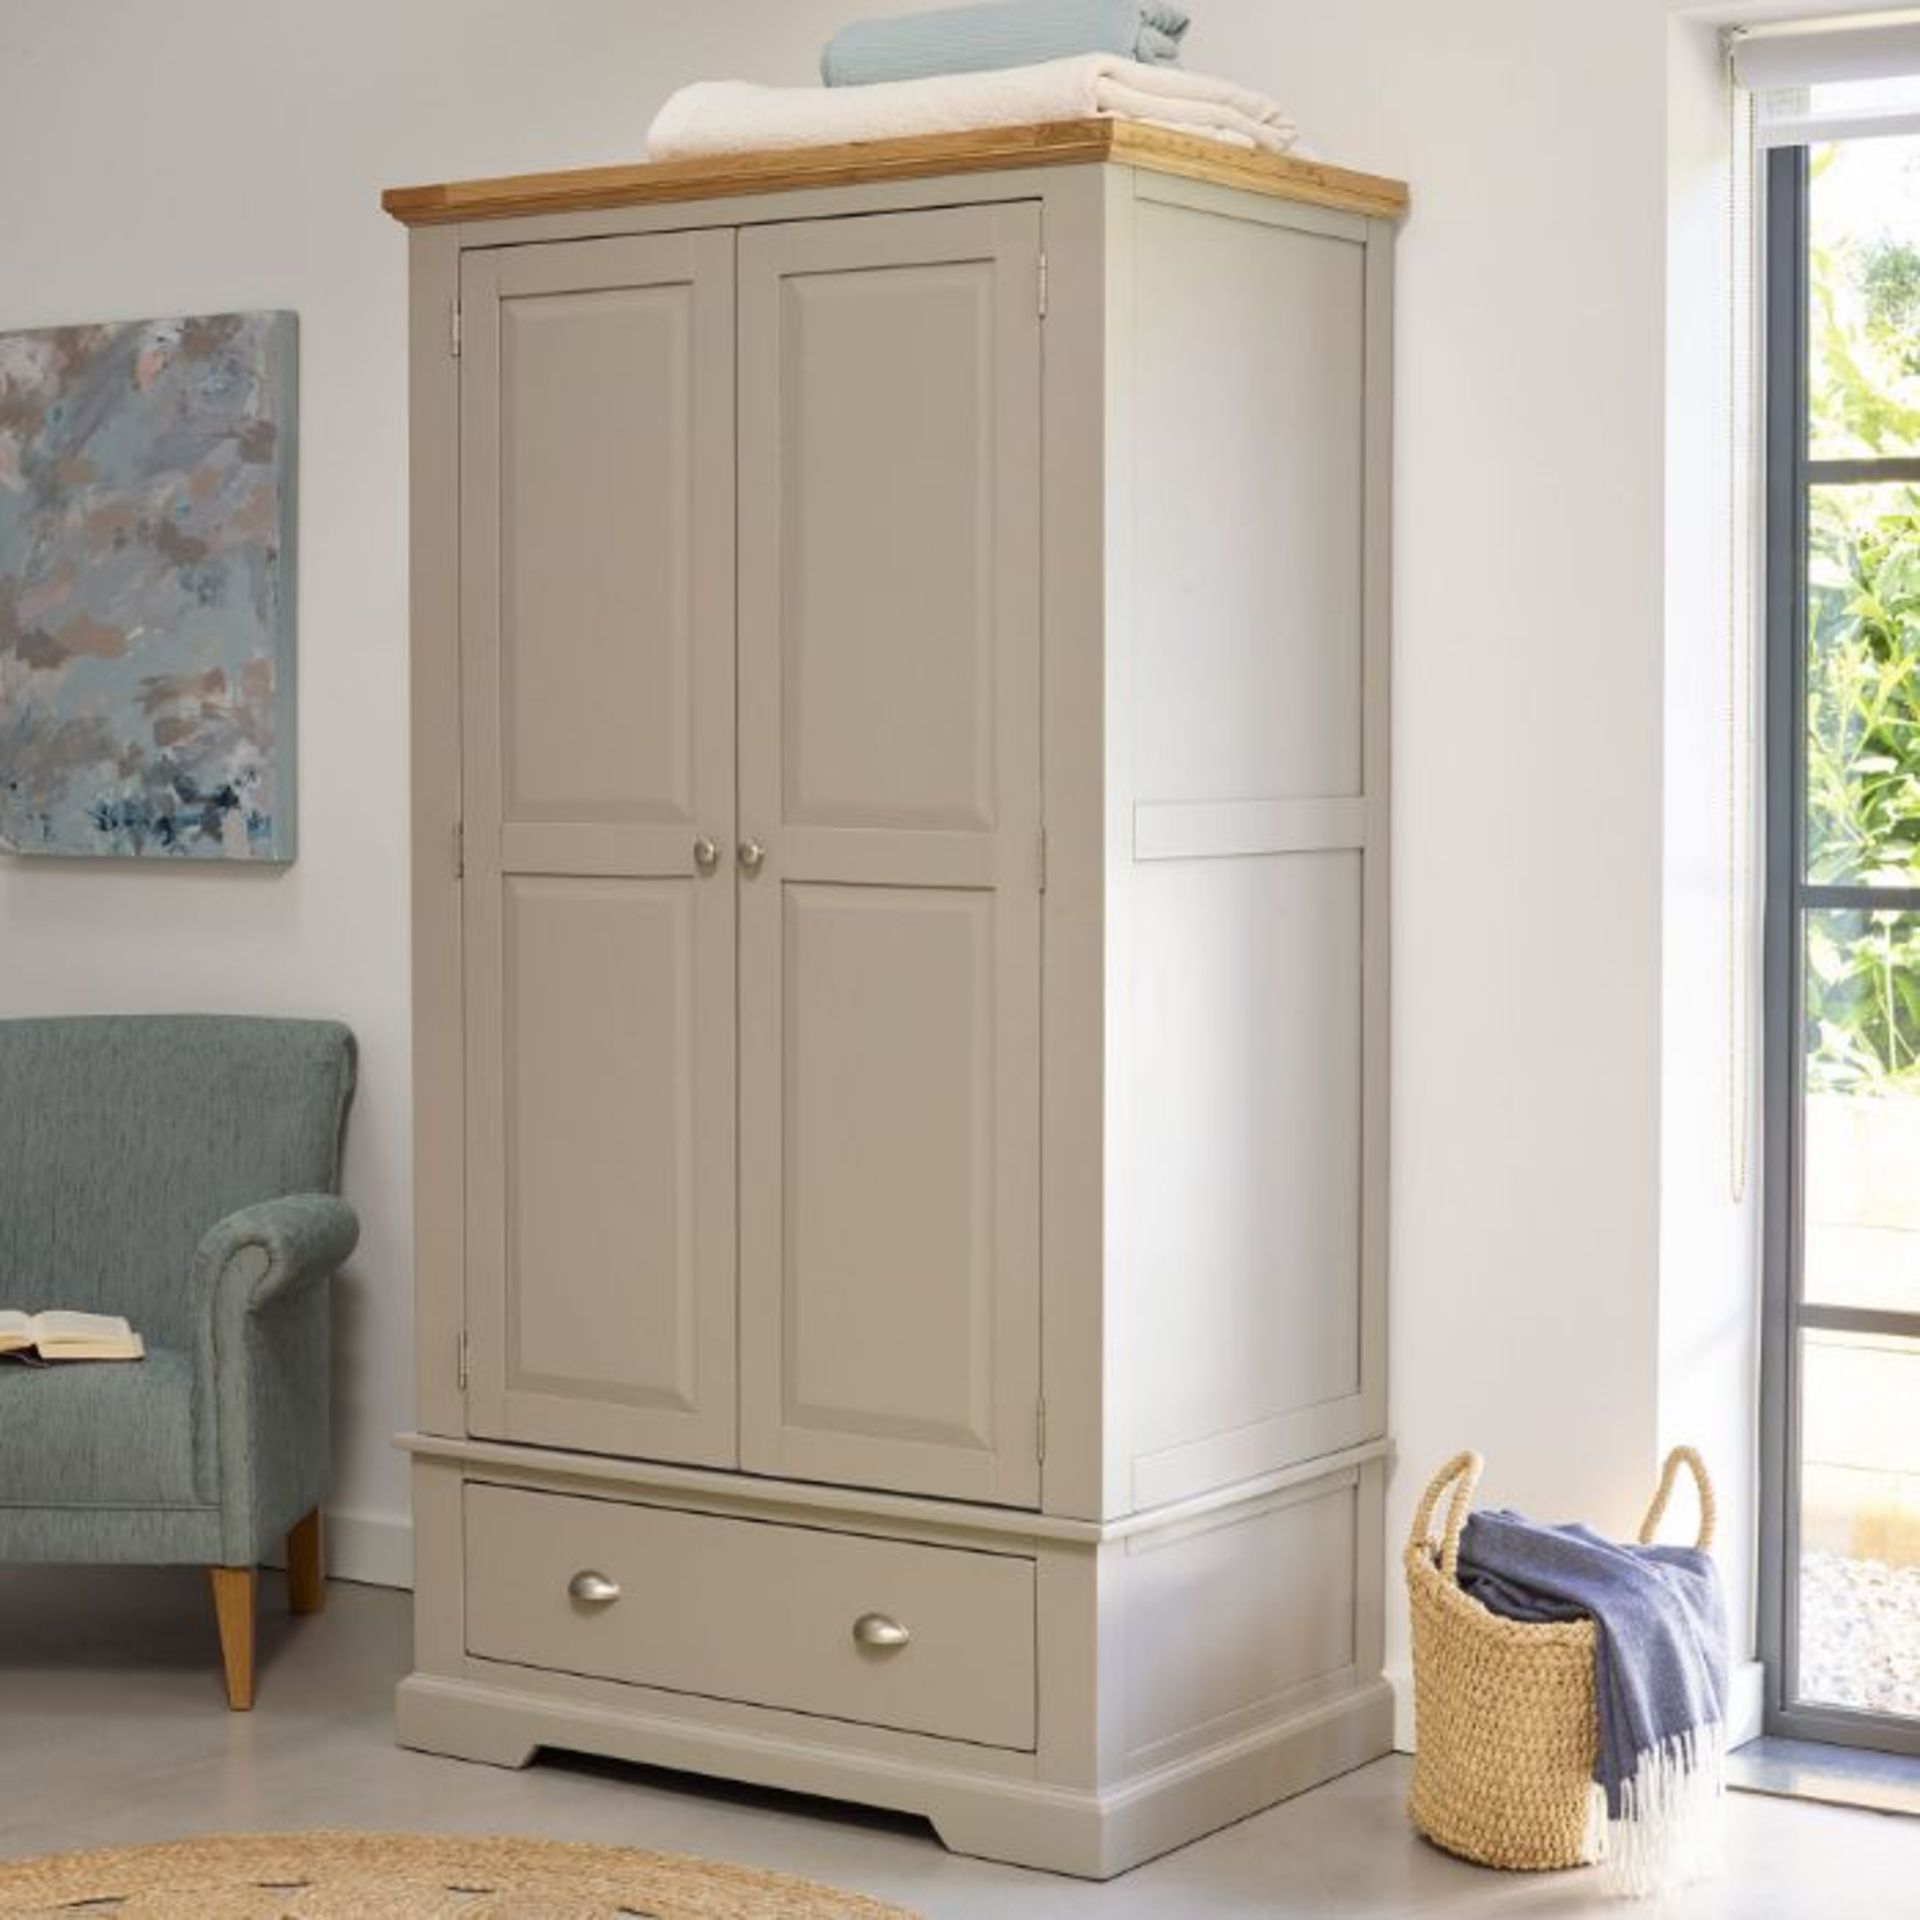 Oak Furnitureland St Ives Natural Oak And Light Grey Painted Double Wardrobe RRP ?694.99 The St Ives - Image 4 of 7